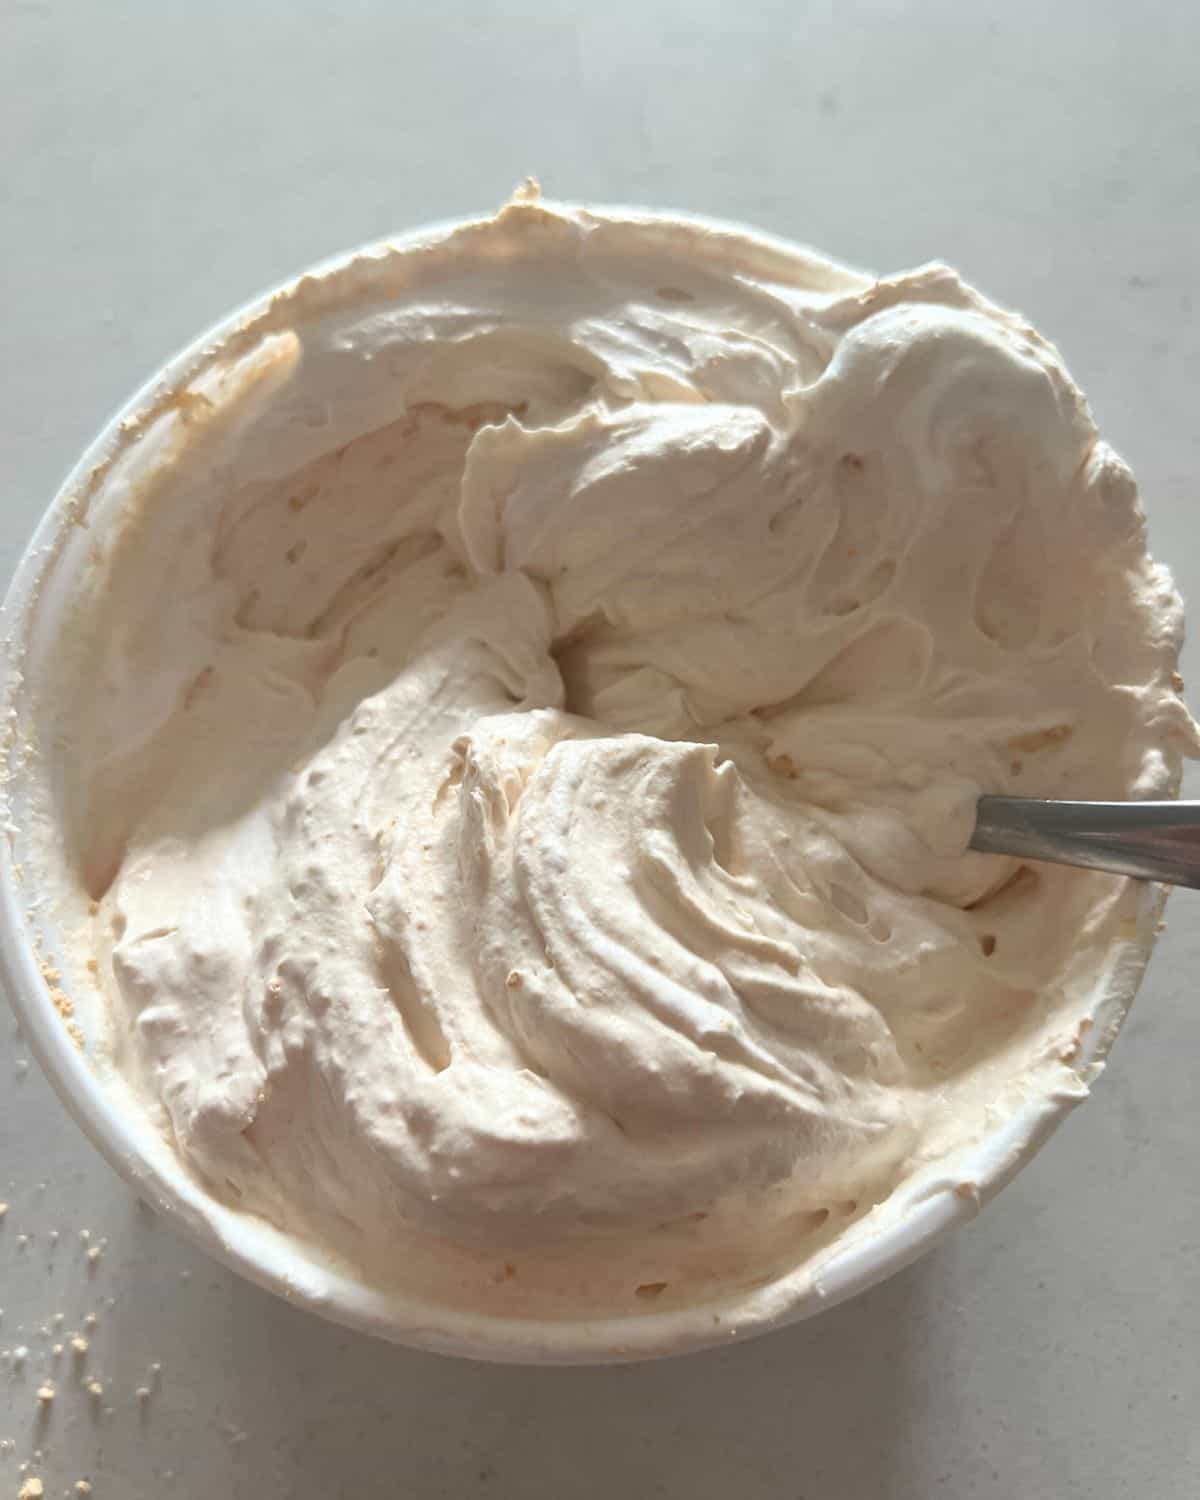 Cool whip and peanut butter powder mixed in a bowl. 